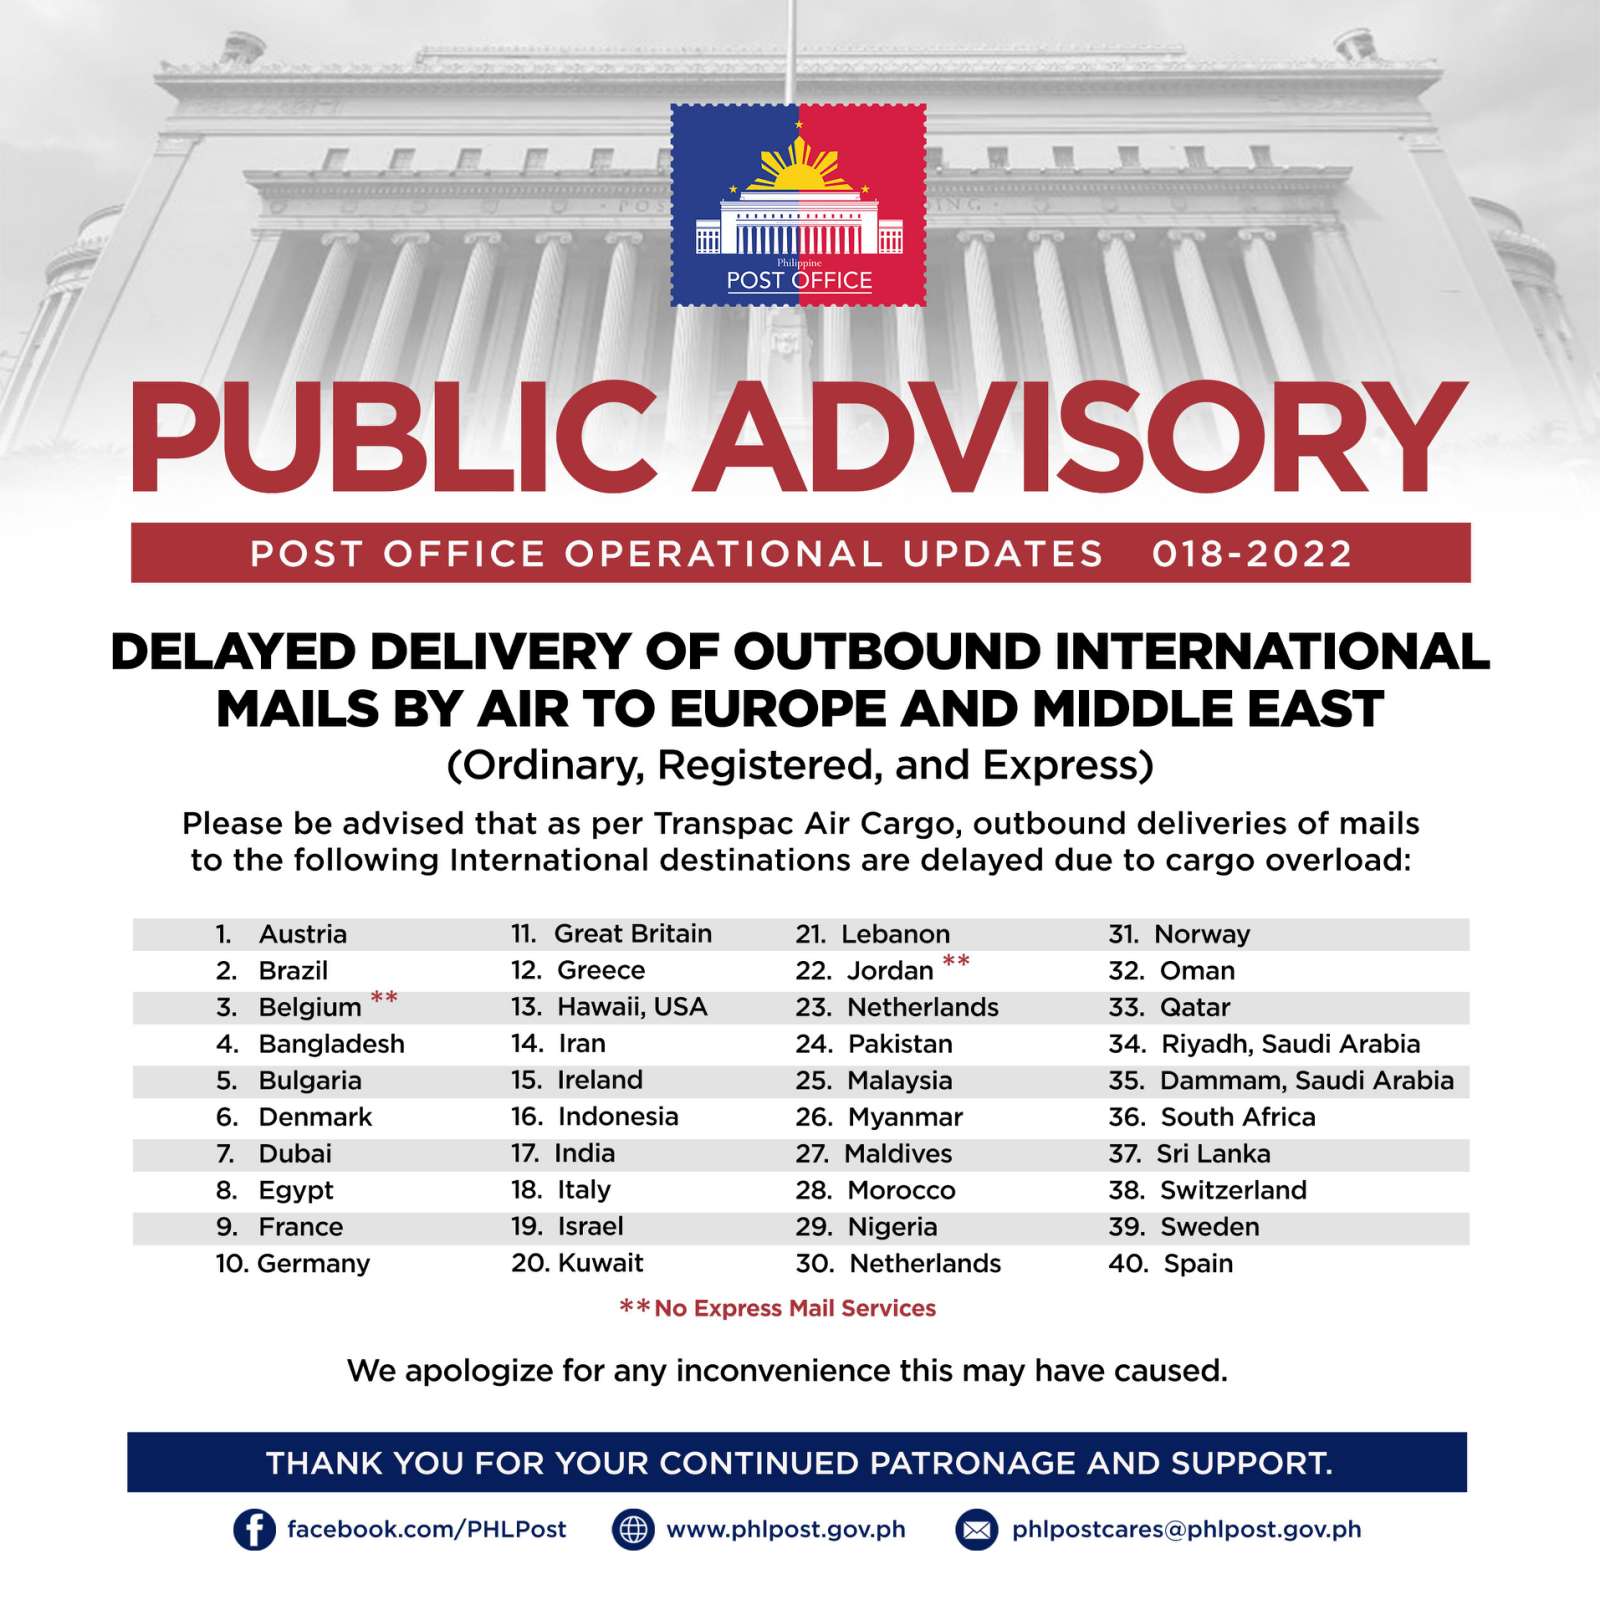 Delayed Delivery of Outbound International Mails by Air to Europe and Middle East